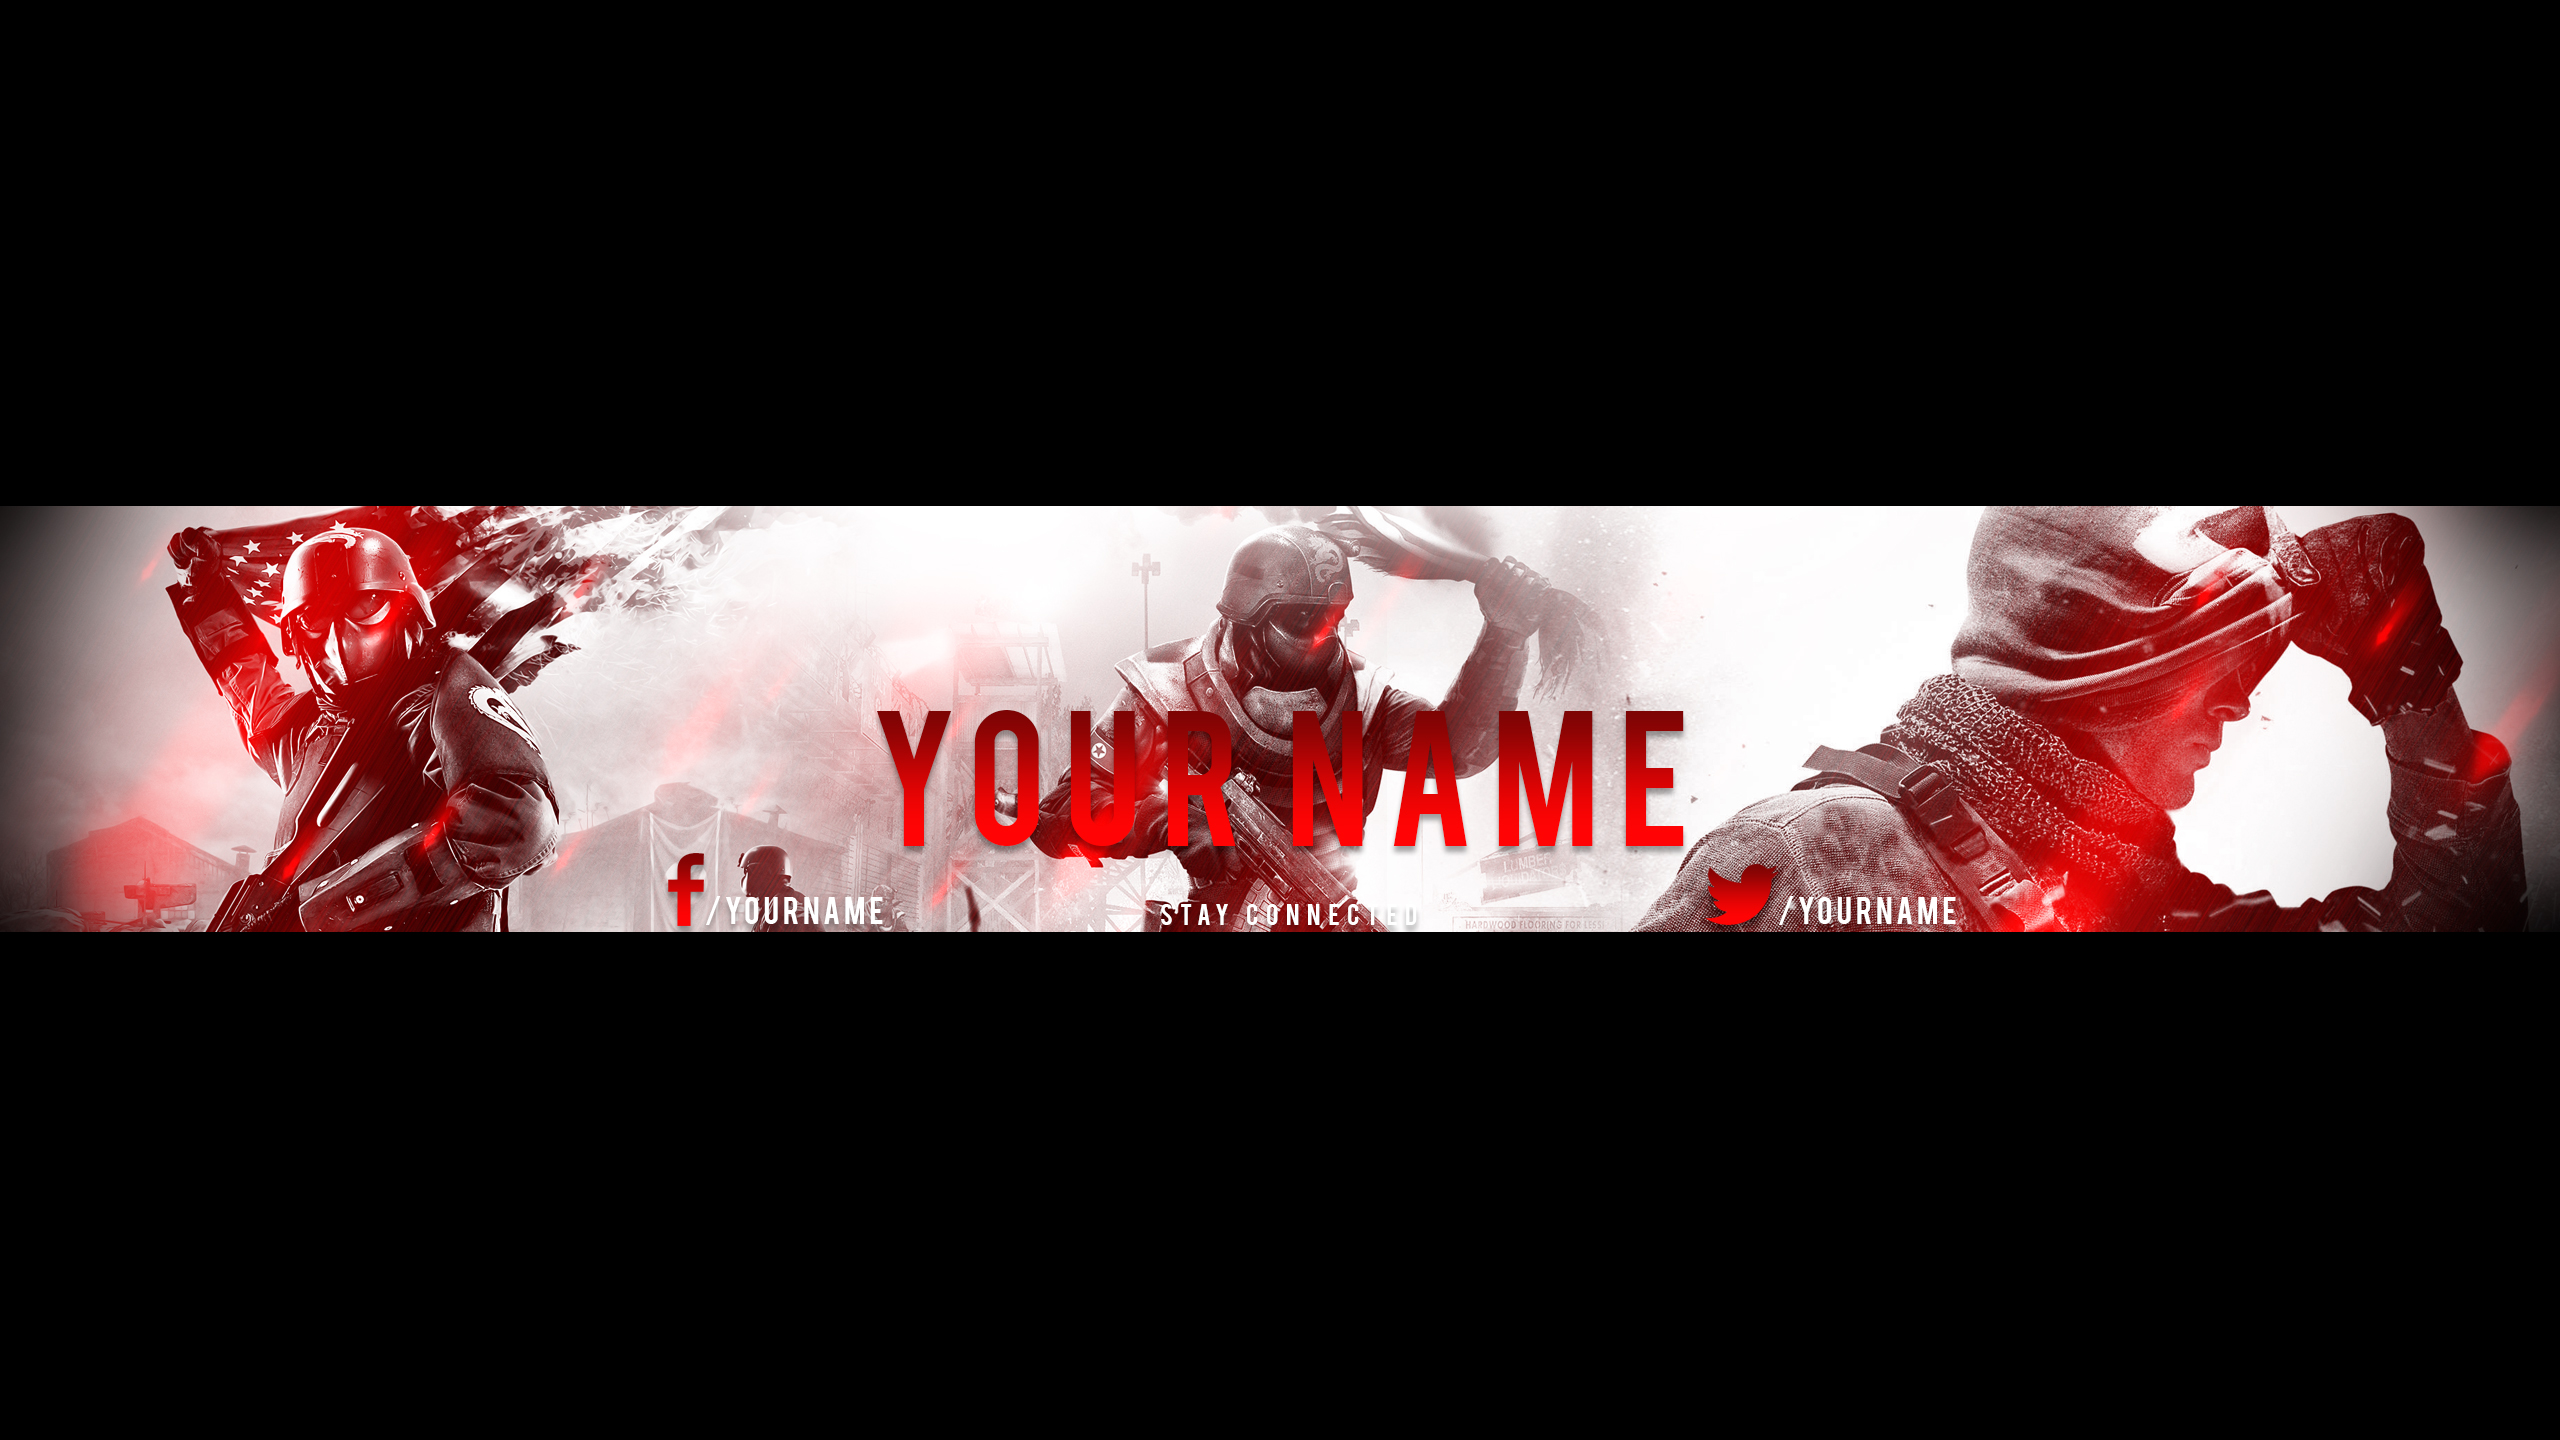 Red gaming banner  by Heiwa Graphiste on DeviantArt